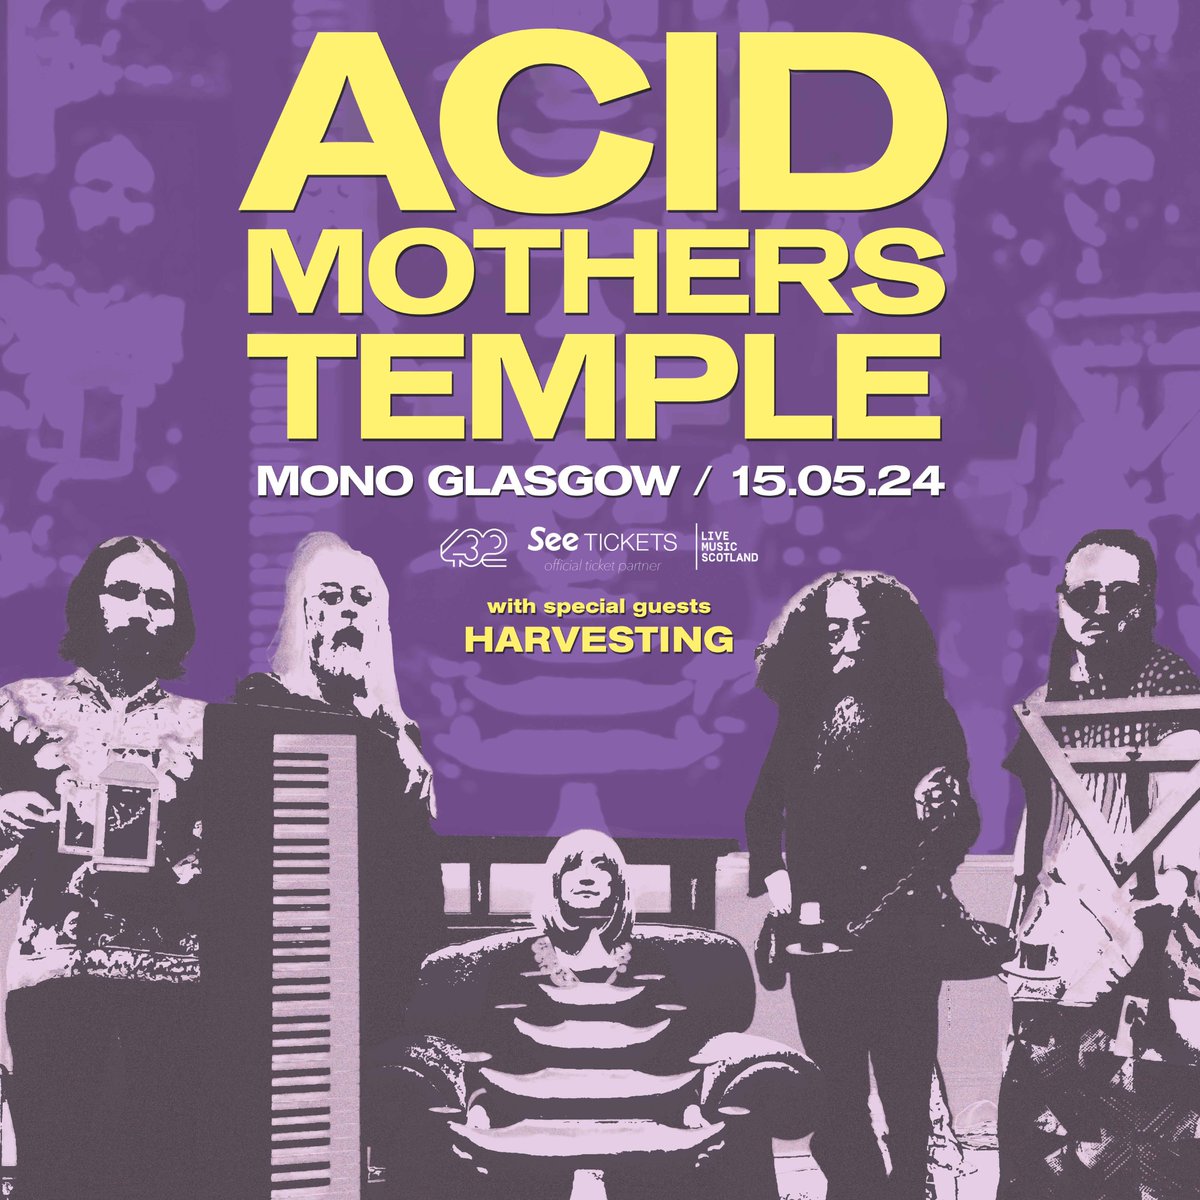 Japanese Psych-Rock legends #acidmotherstemple return to Scotland for a cosmic one at @monoglasgow on 15 May ✨ Final tickets on sale NOW ➡ bit.ly/48LFNVA